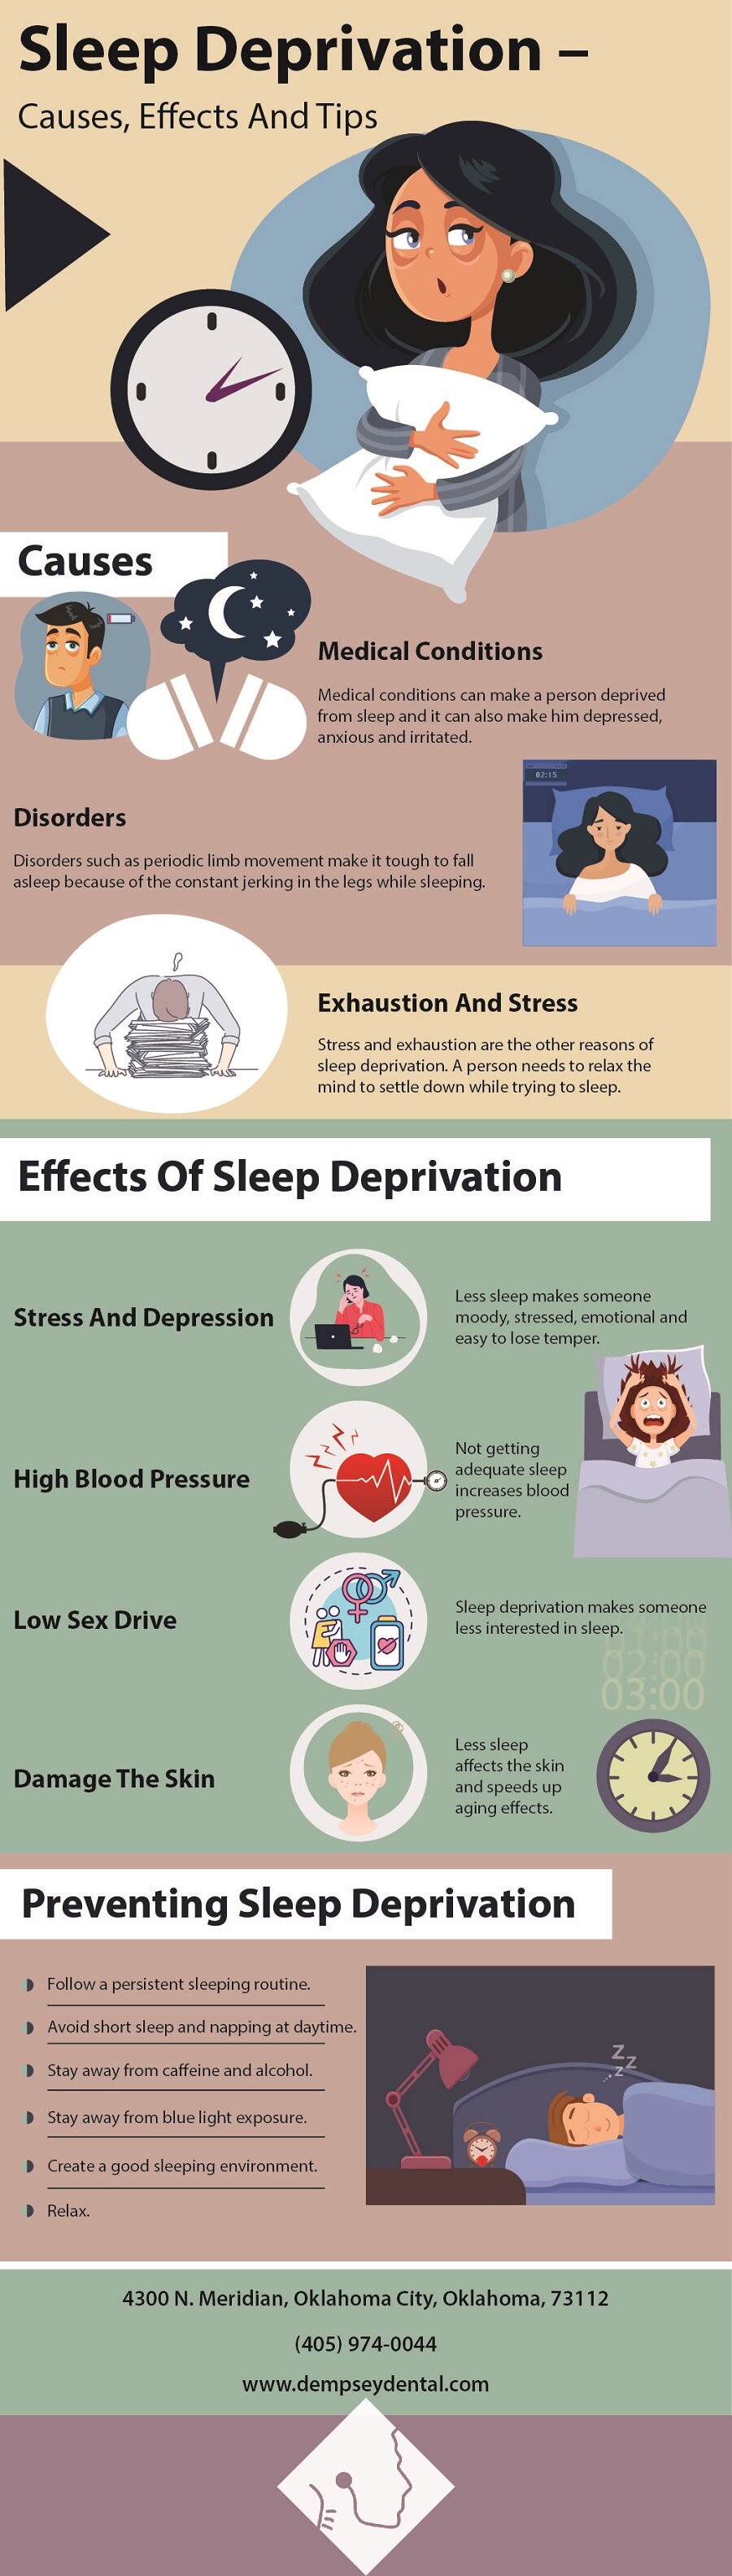 All About Sleep Deprivation (Infographic)